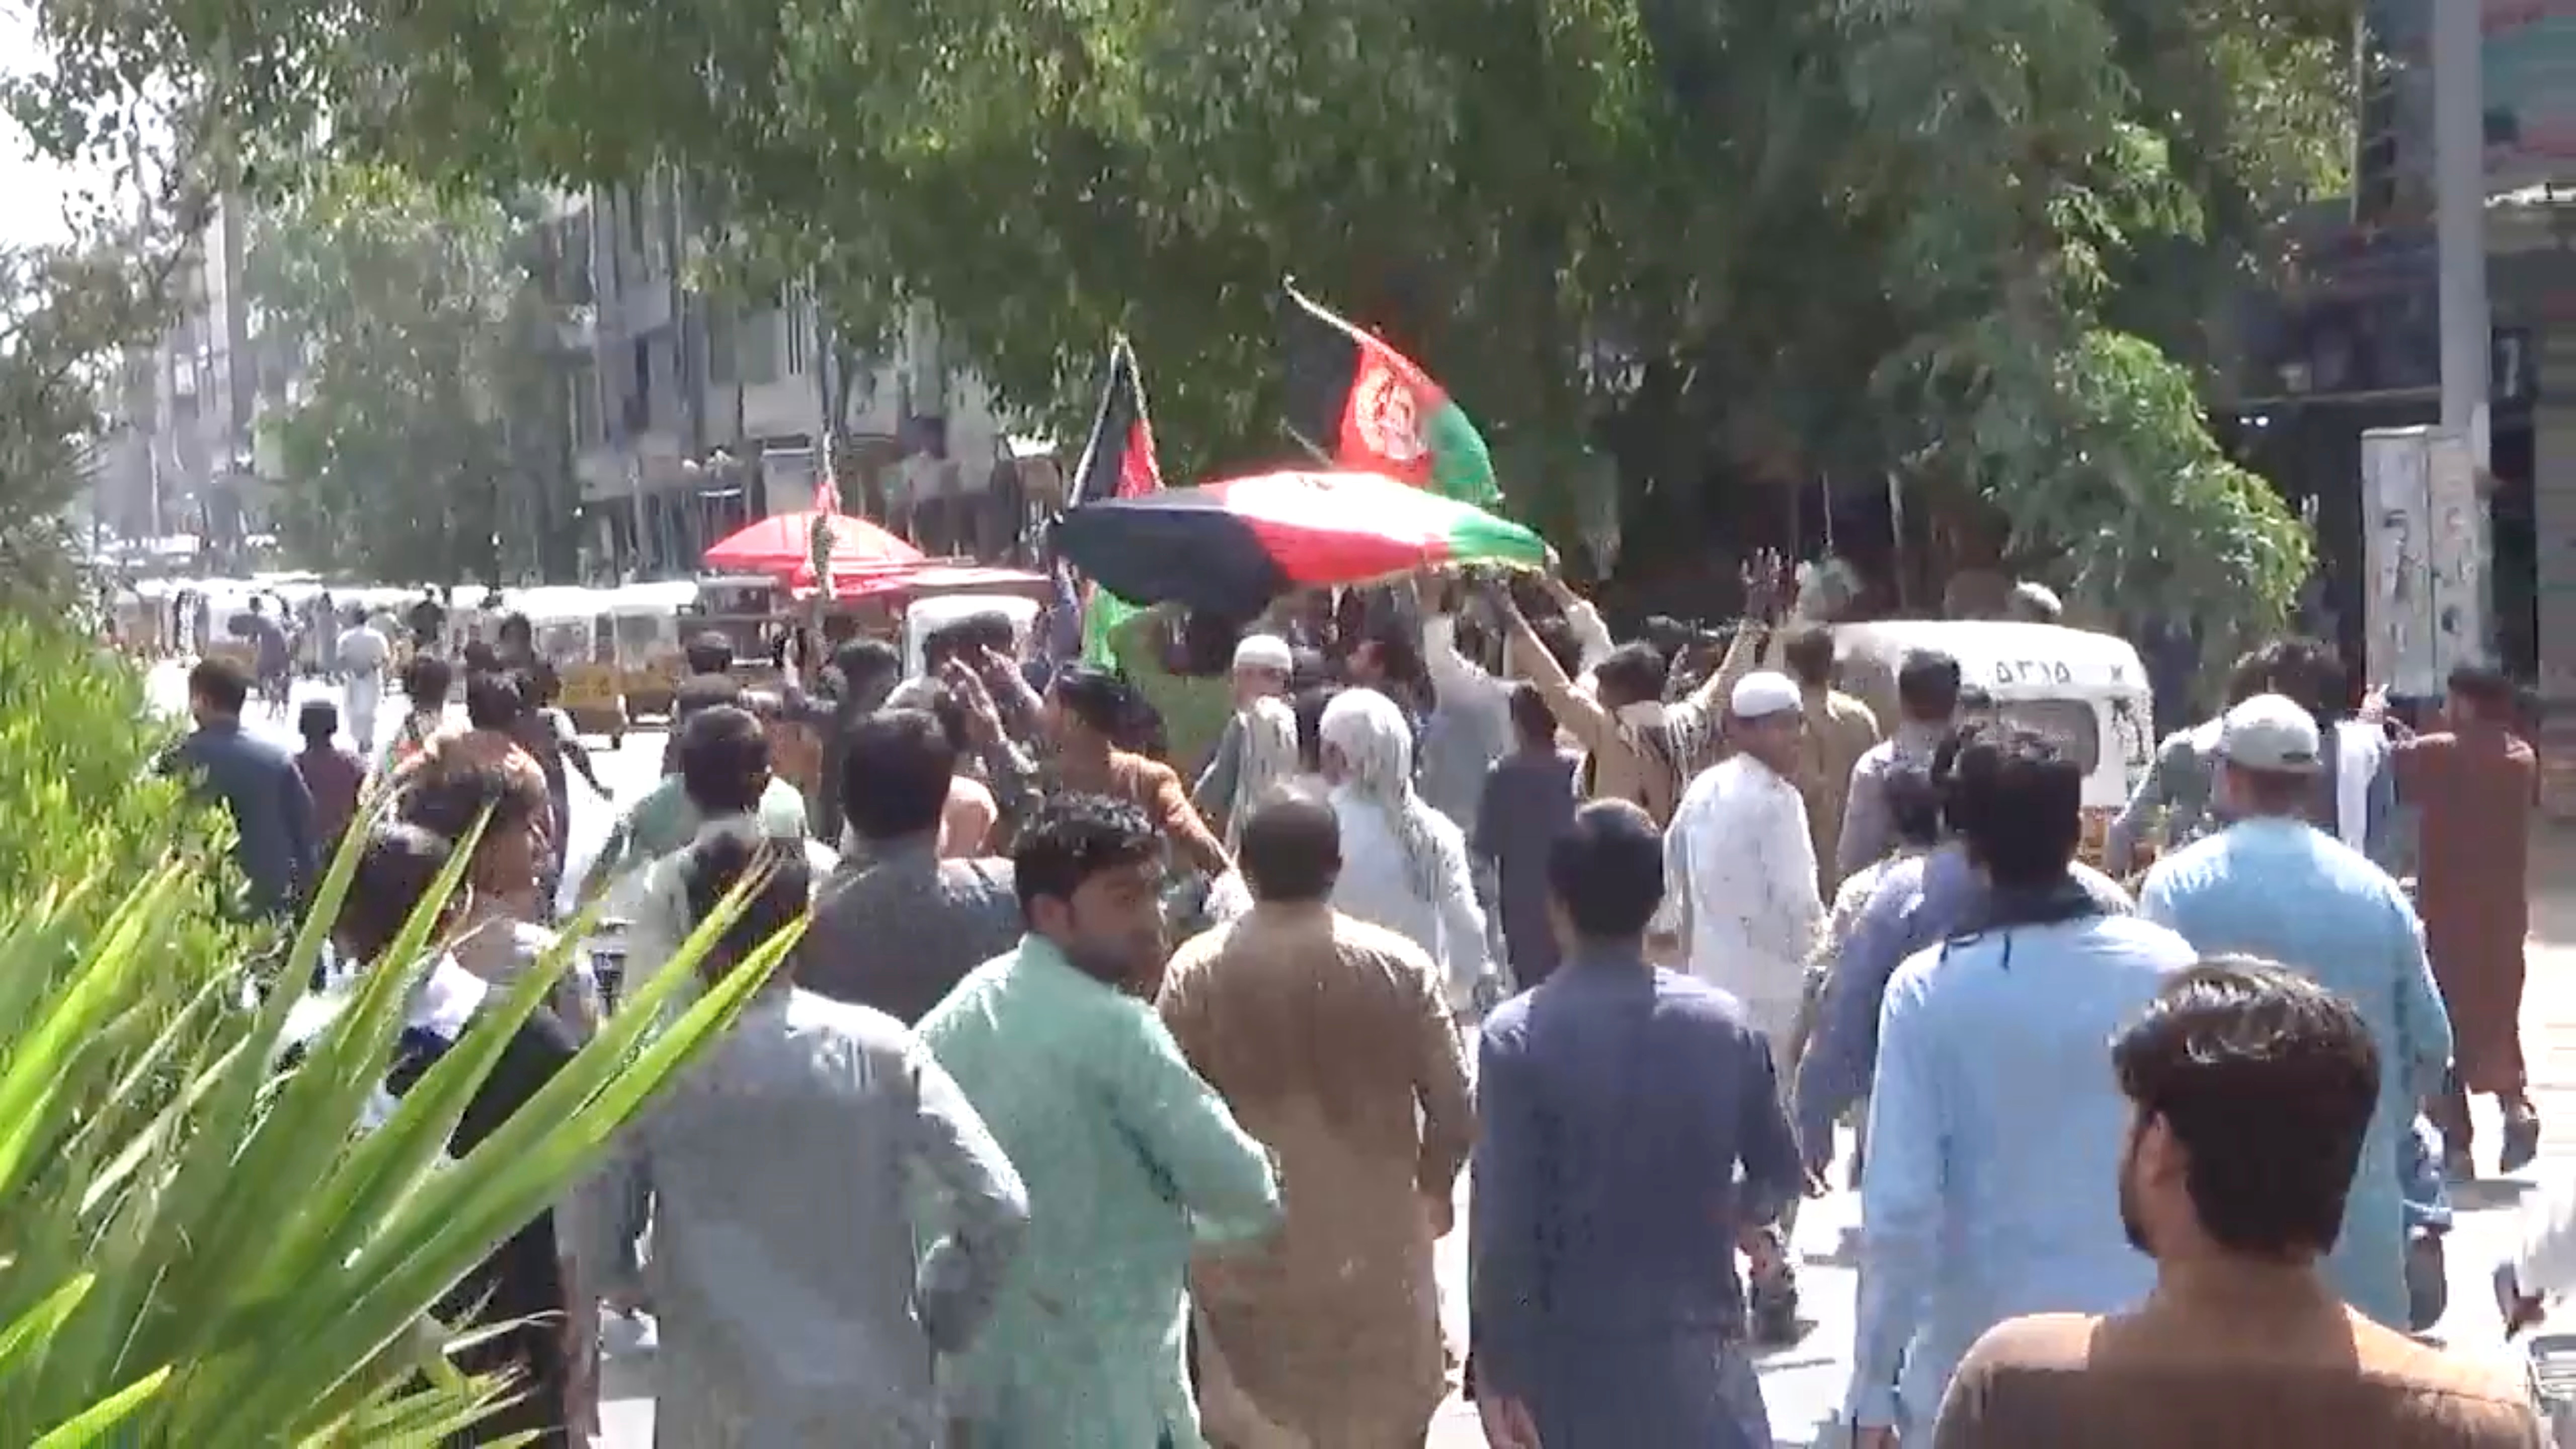 People carry Afghan flags as they take part in an anti-Taliban protest in Jalalabad, Afghanistan August 18, 2021 in this screen grab taken from a video. Pajhwok Afghan News/Handout via REUTERS 